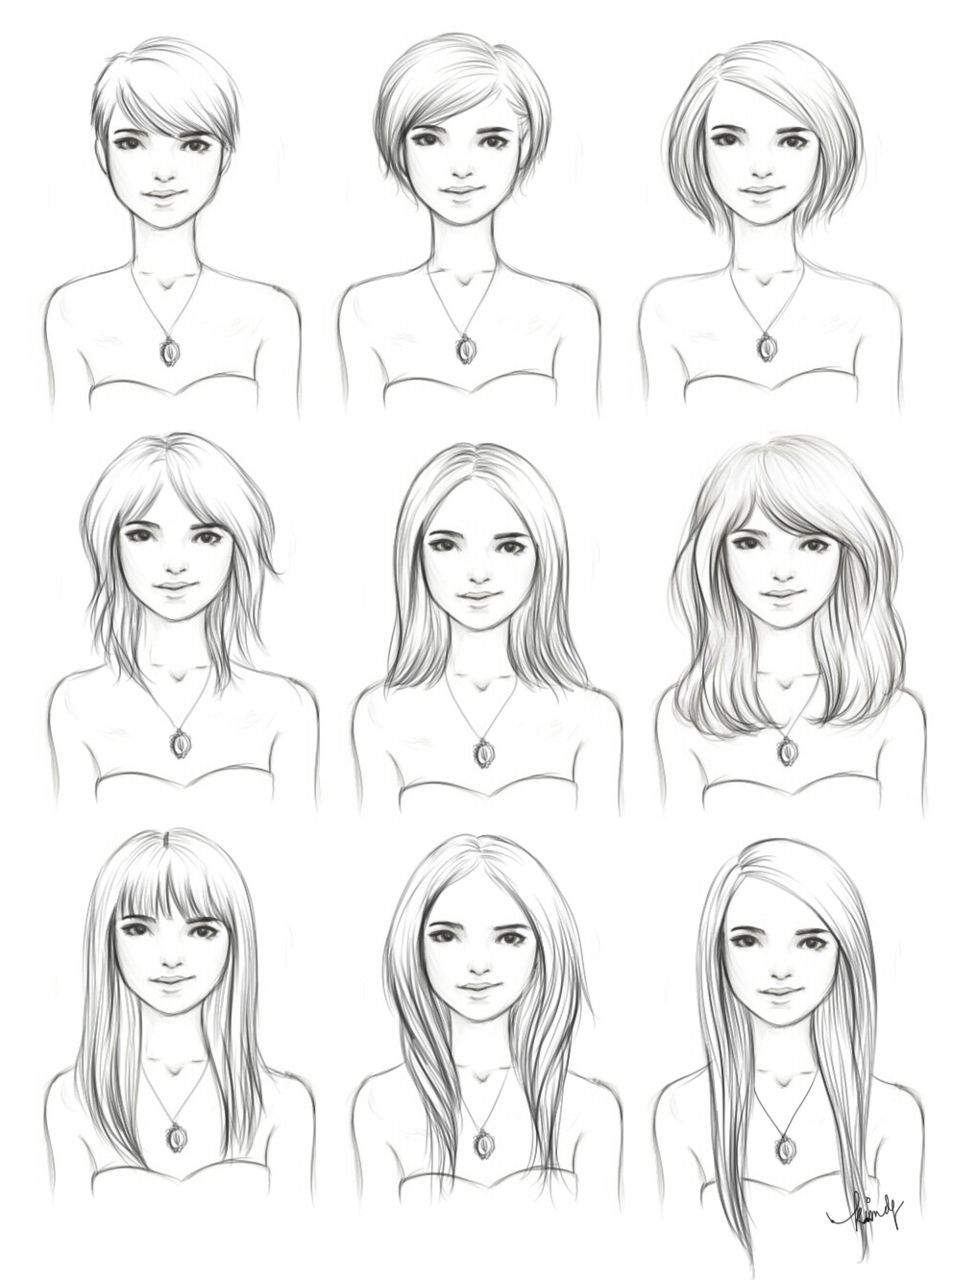 Cute pictorial showing how to grow your hair out with style :) I miss having the